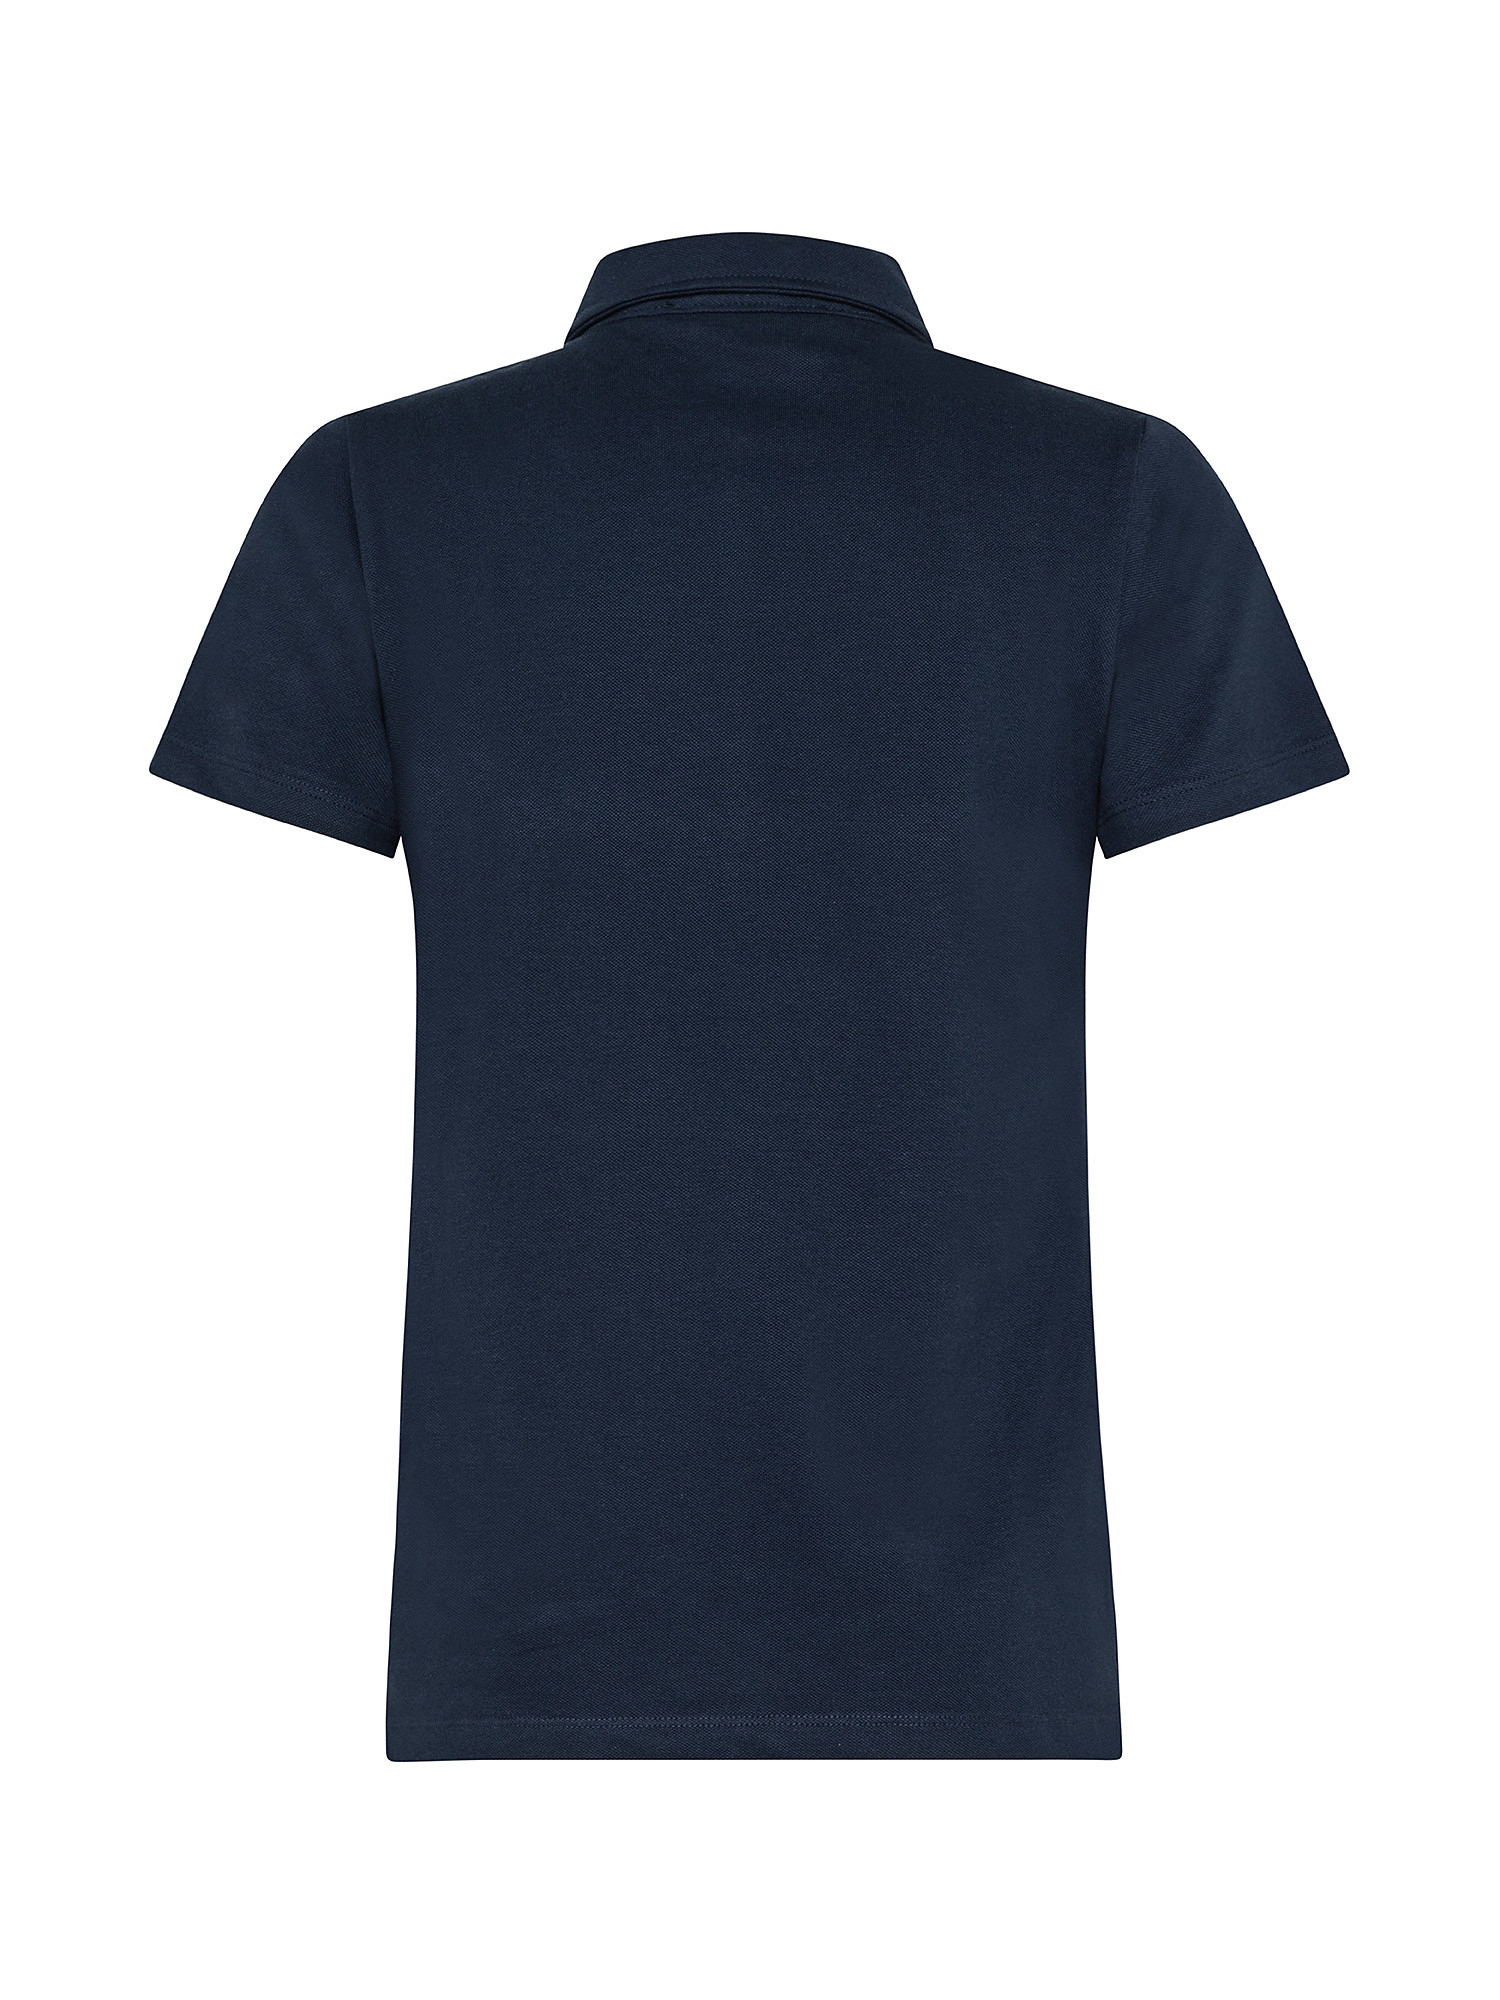 Classic polo shirt, Blue, large image number 1